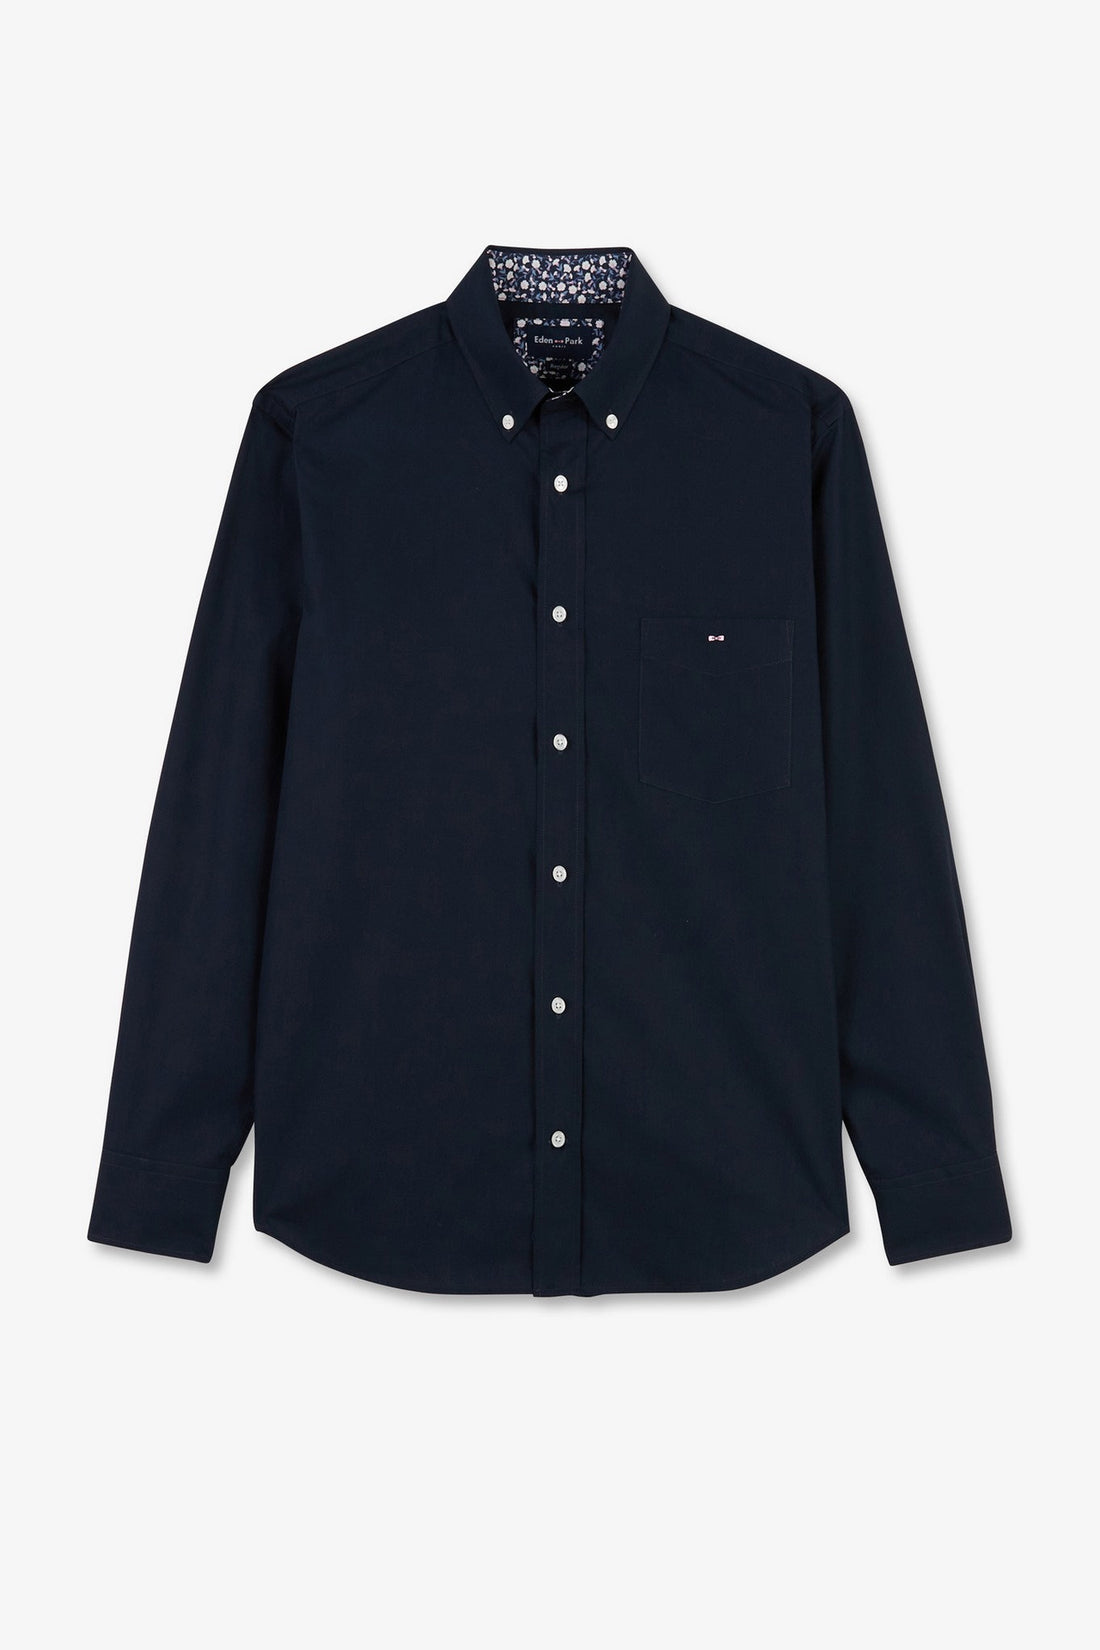 Navy Blue Shirt With Floral Detail_E24CHECL0002_BLF_02